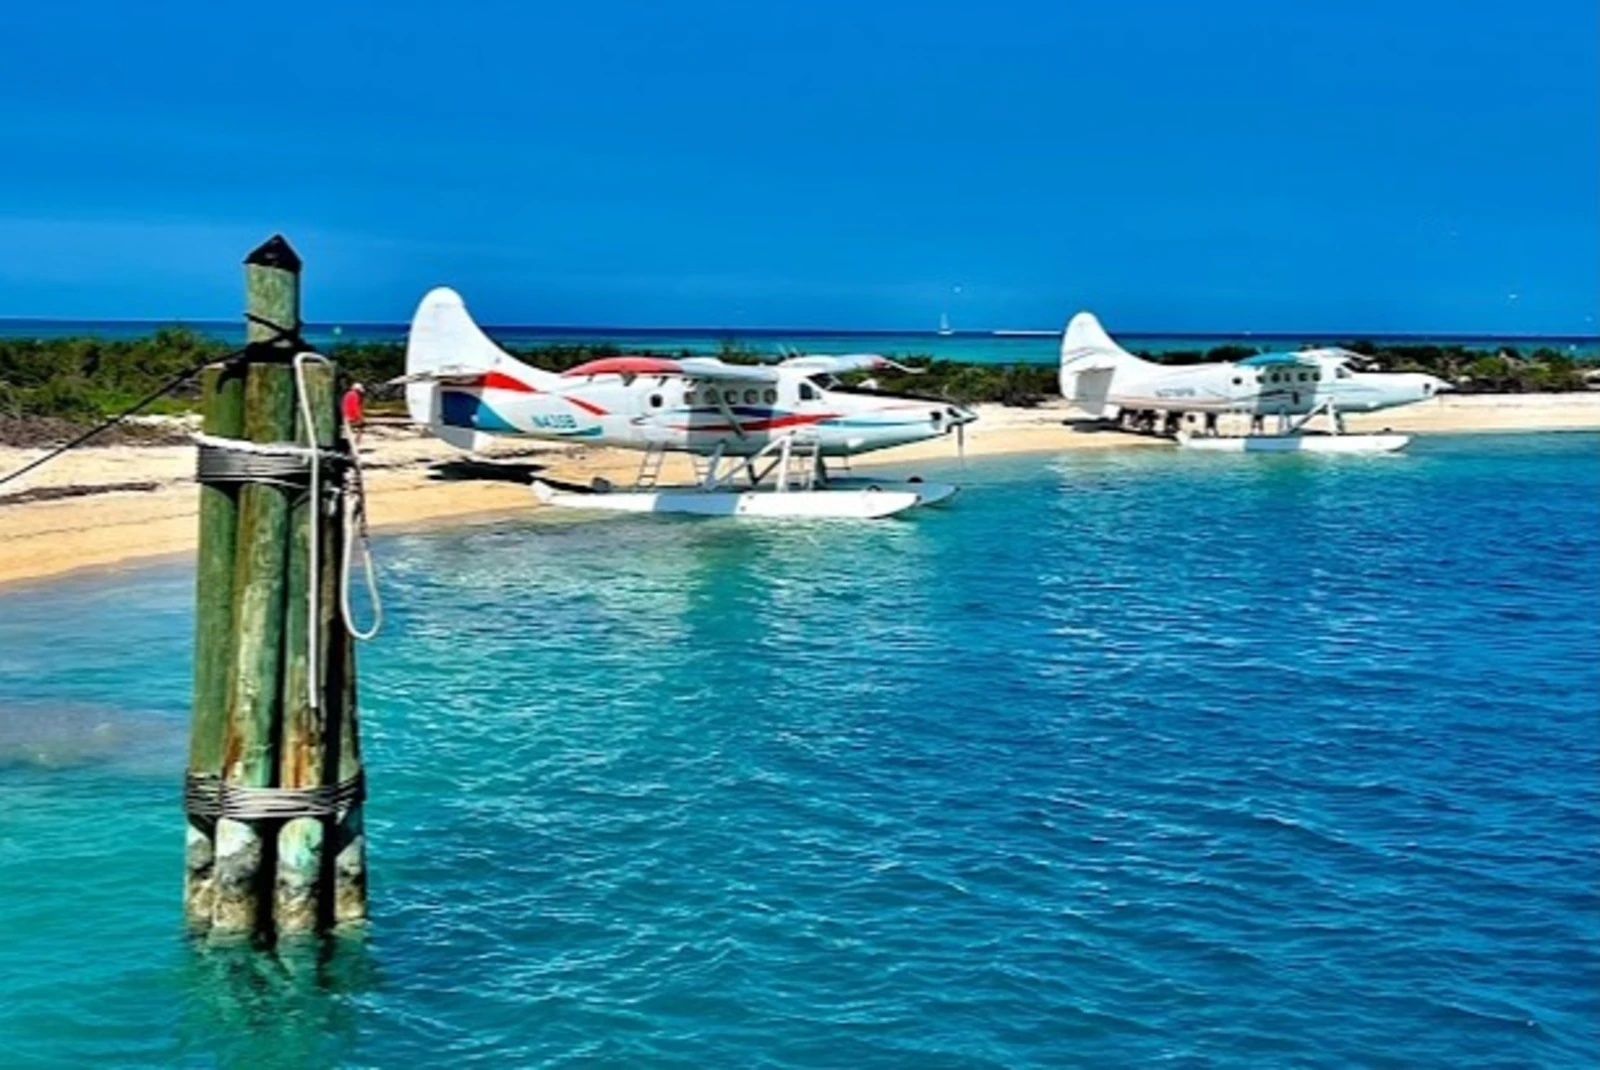 Sea plane is one of the transportation going to Dry Tortugas National Park.